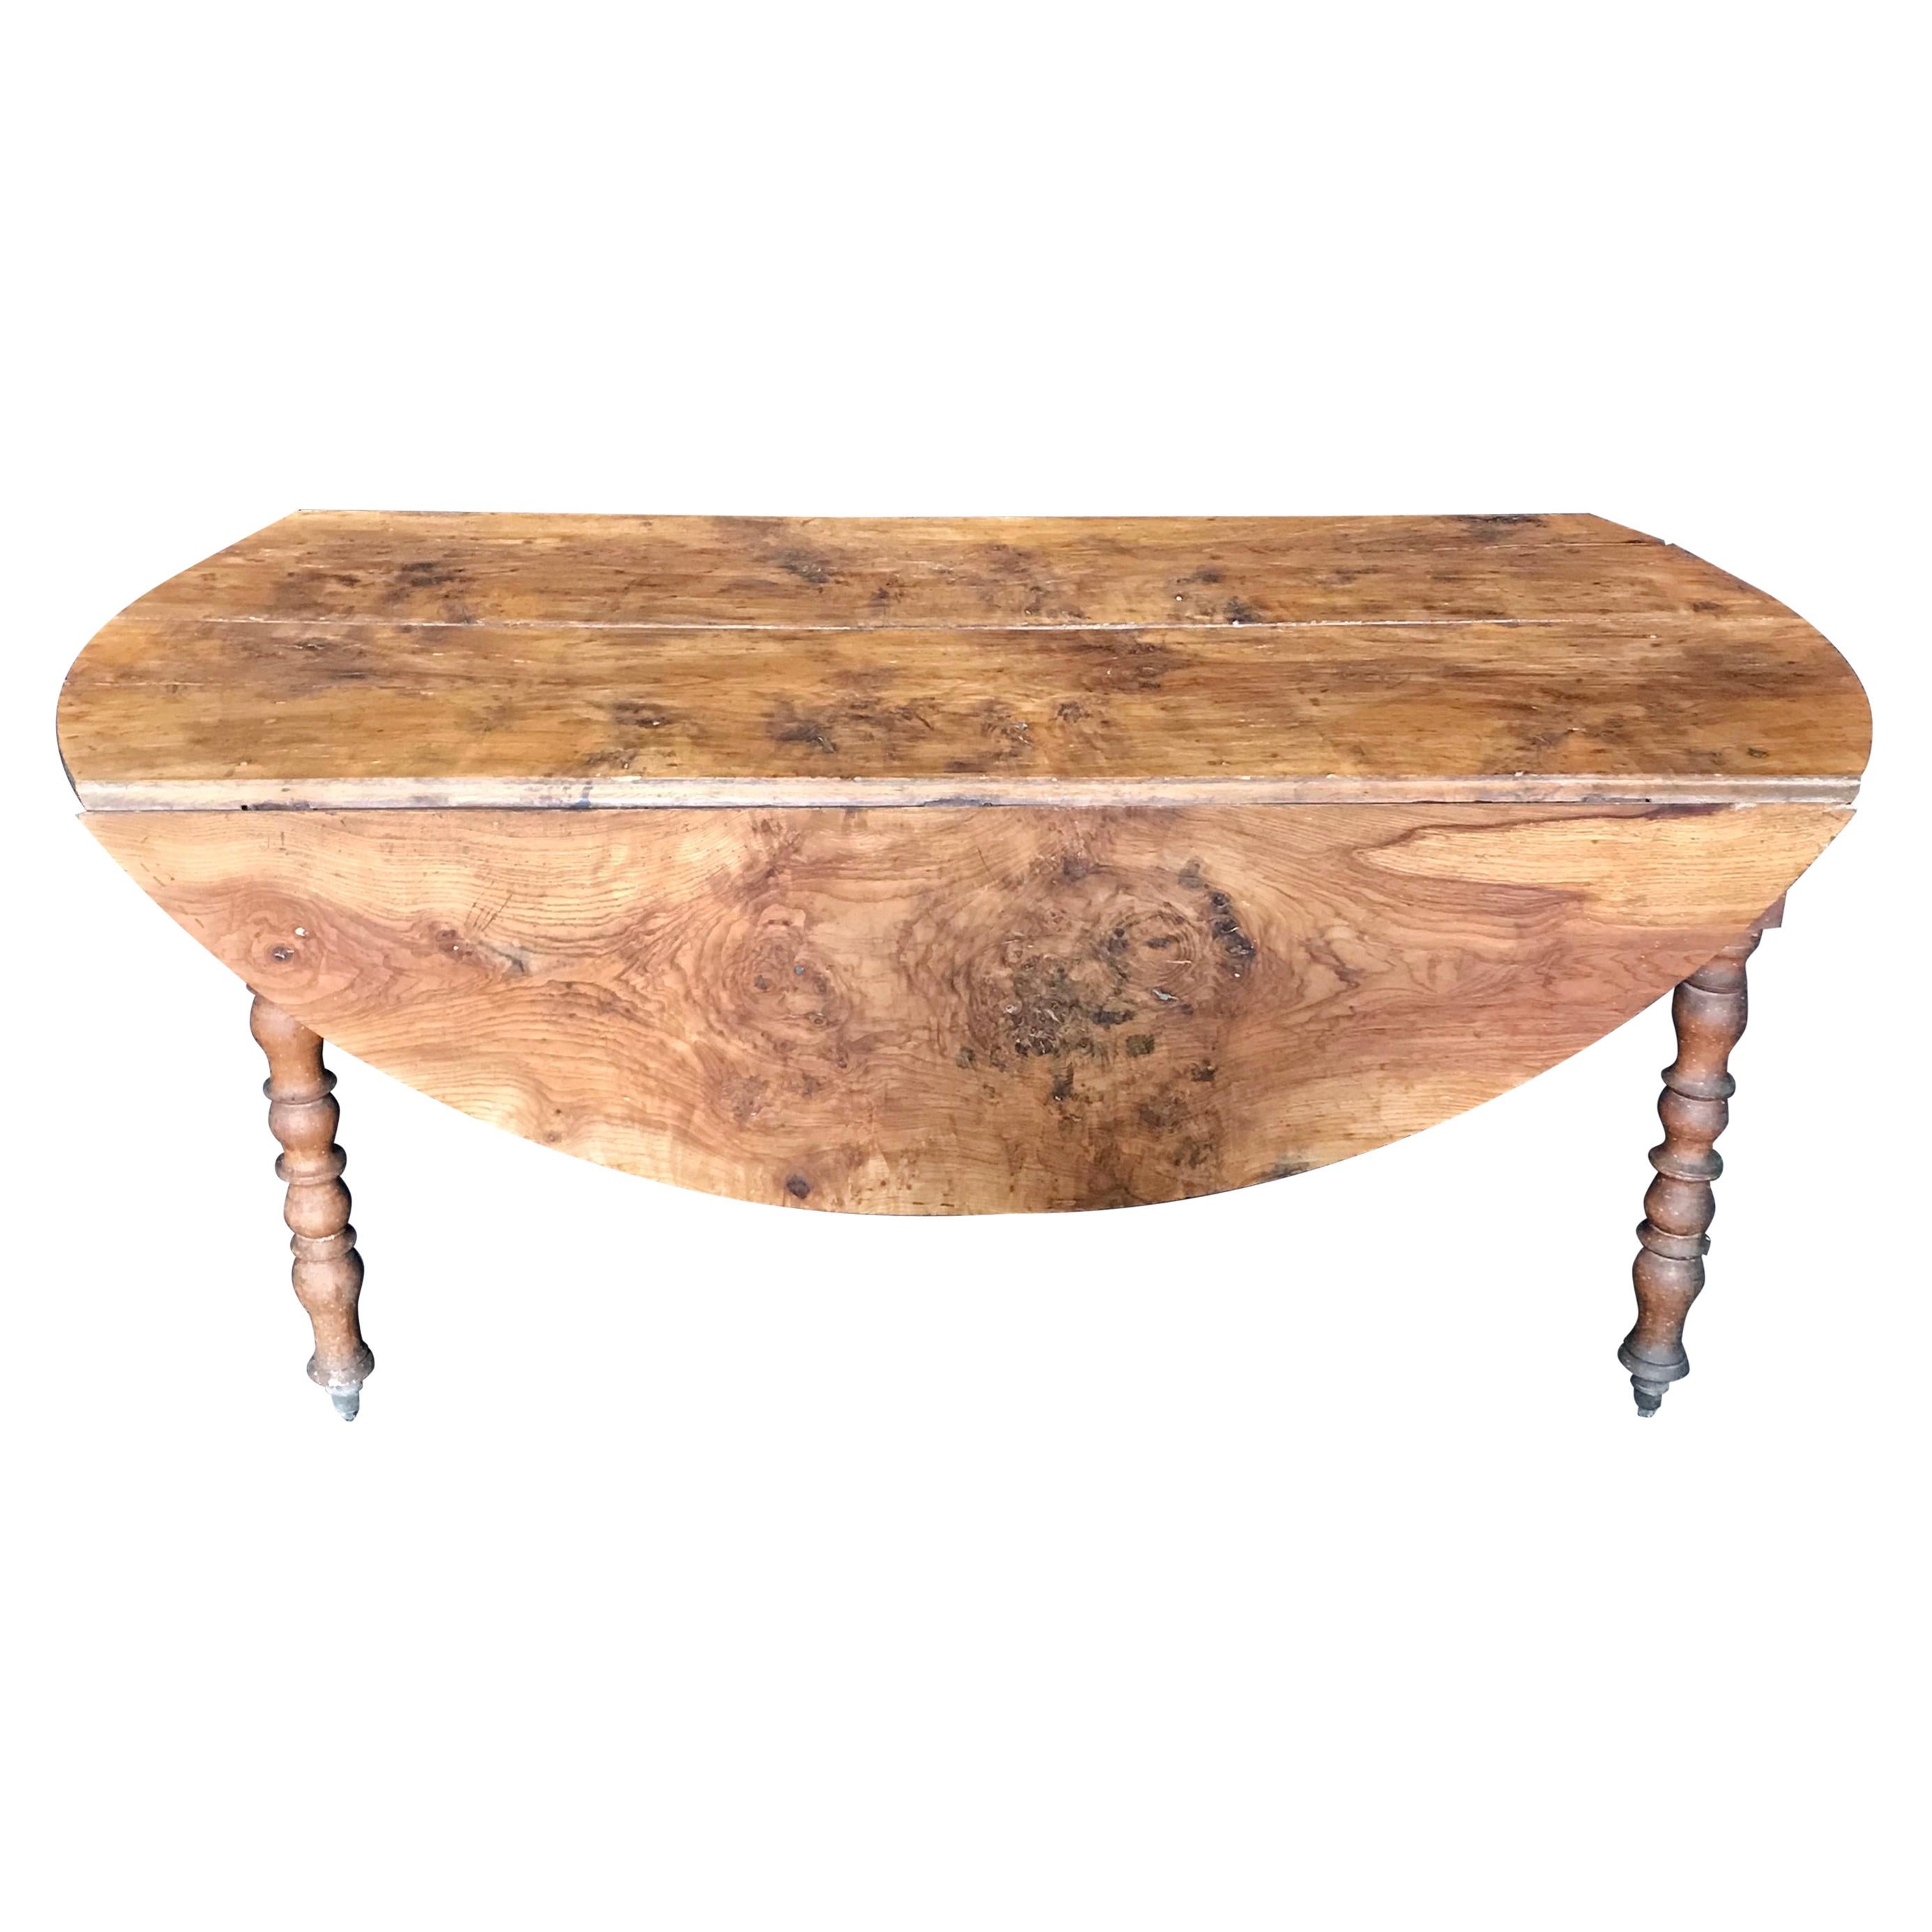 Character Rich Elm Antique Drop Leaf Round Dining Table